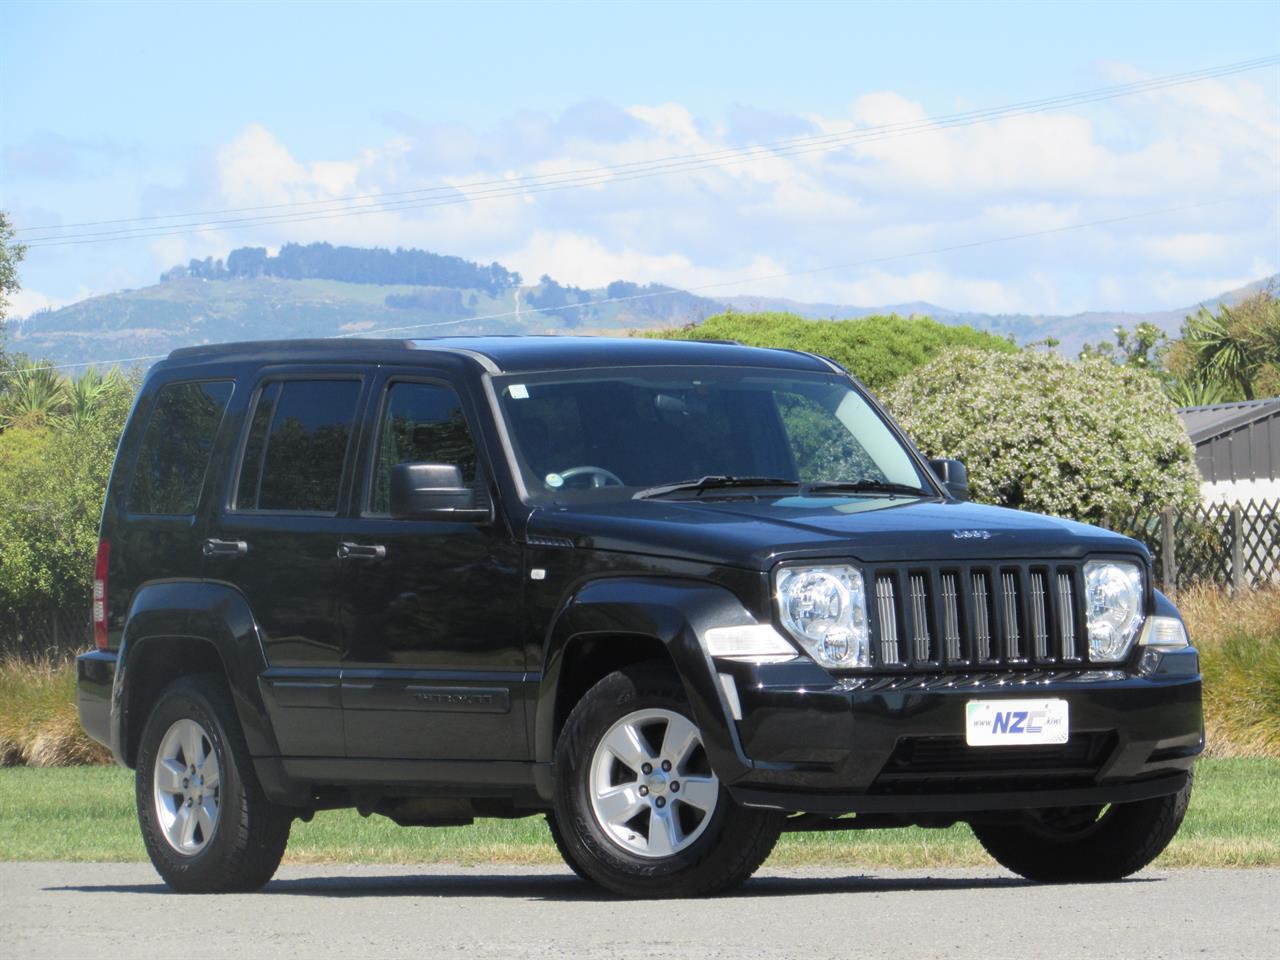 NZC 2010 Jeep Cherokee just arrived to Christchurch